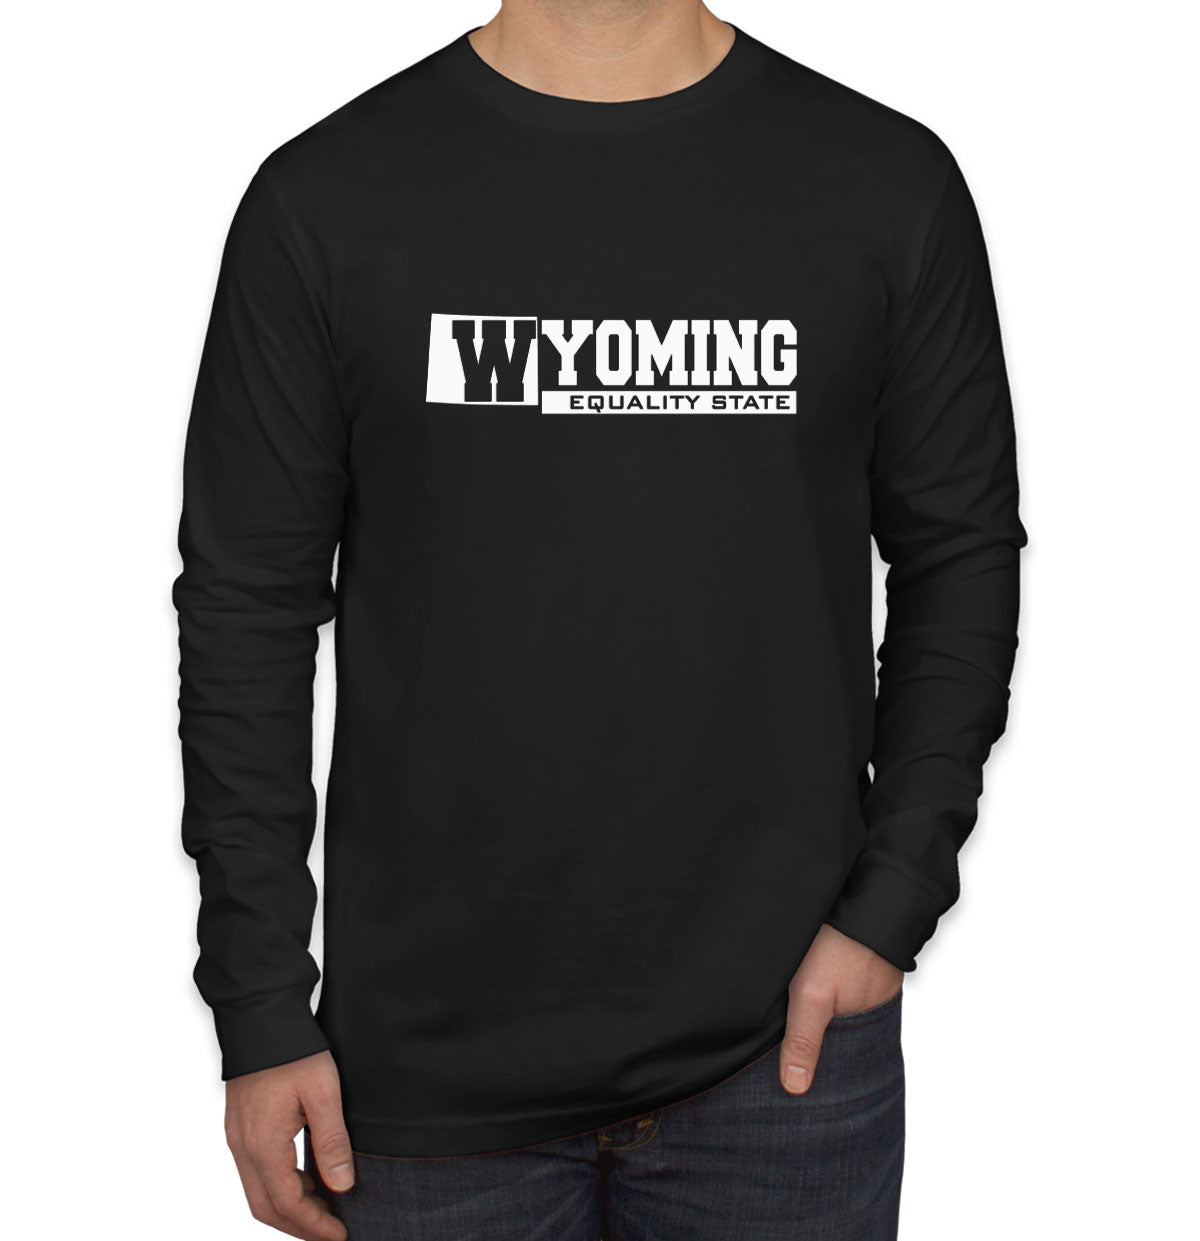 Wyoming Equality State Men's Long Sleeve Shirt